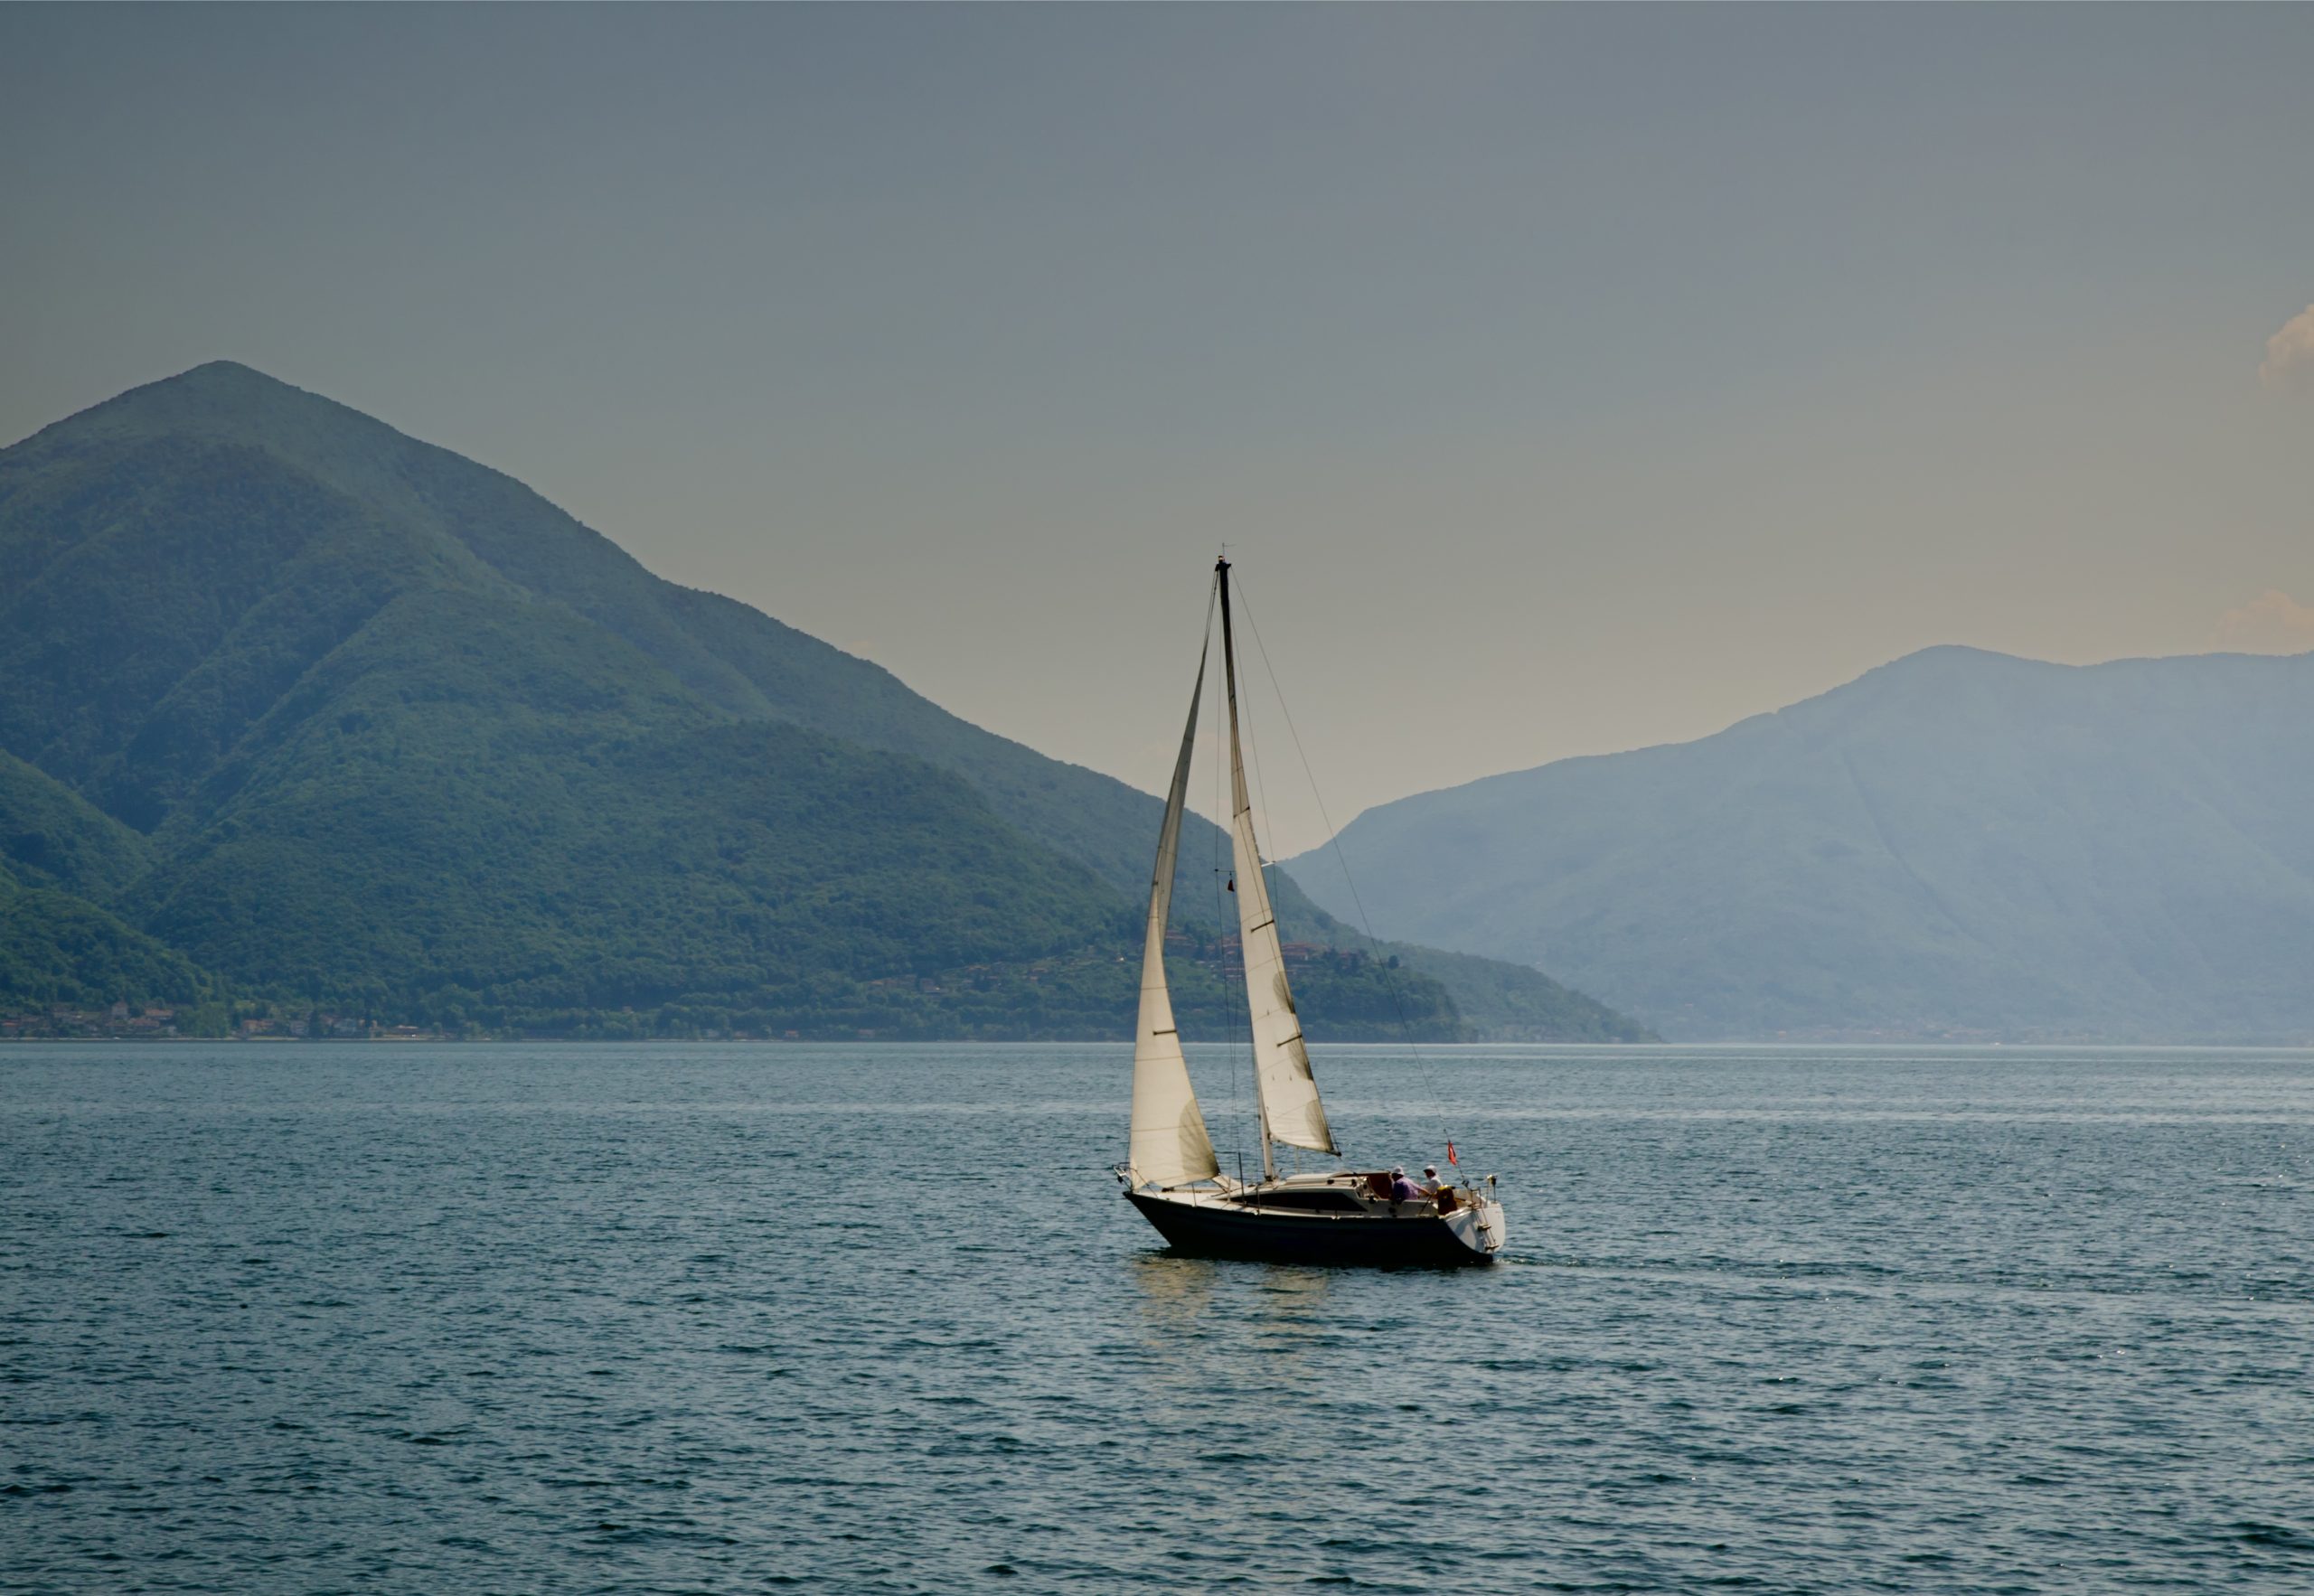 A sailing boat in the middle of the calm sea by the hills captured in Switzerland